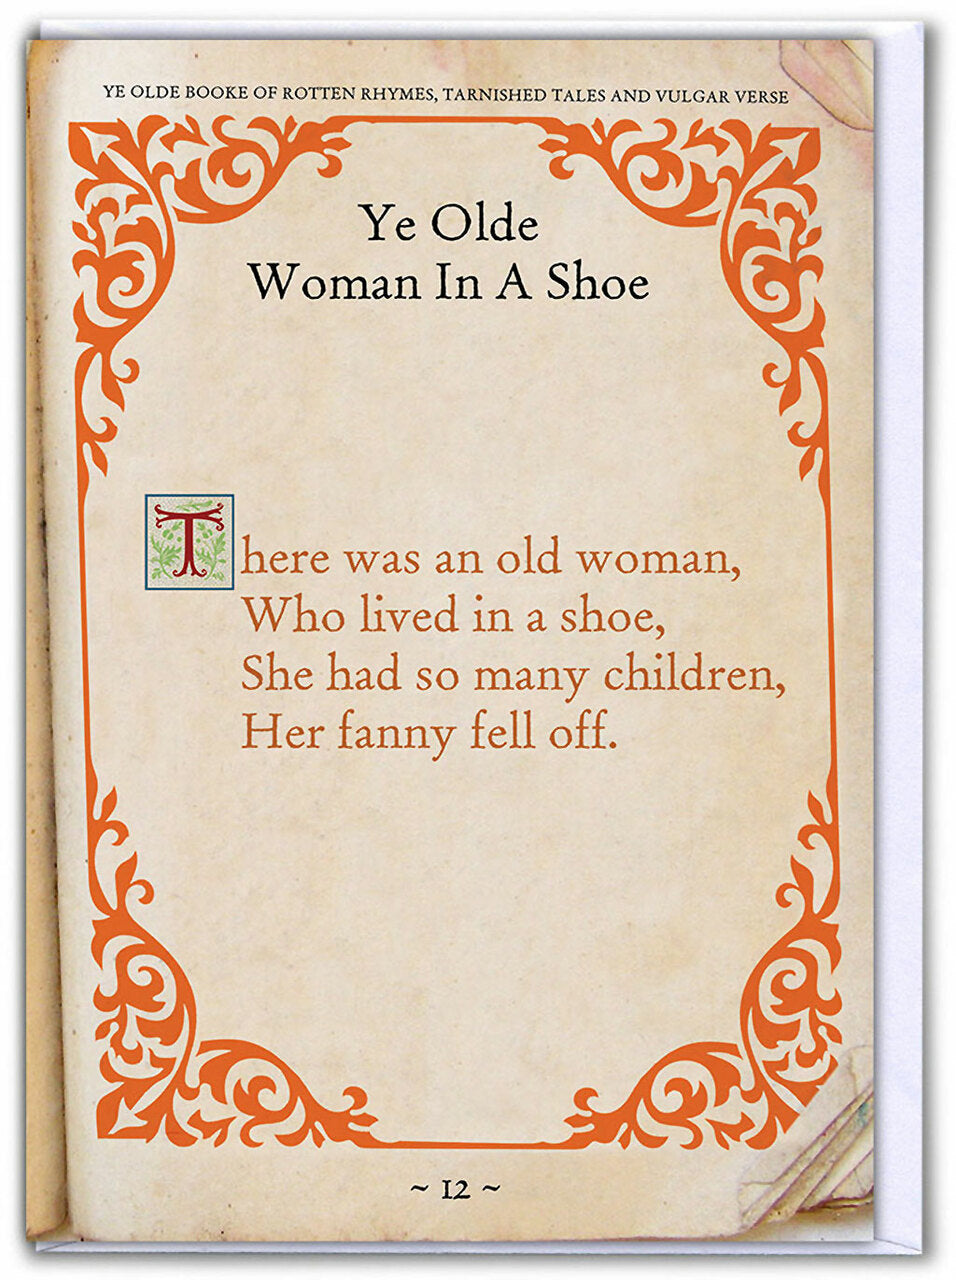 Cheeky Nursery Rhyme Card - The old woman in a shoe - sweary greeting card - Brainbox Candy